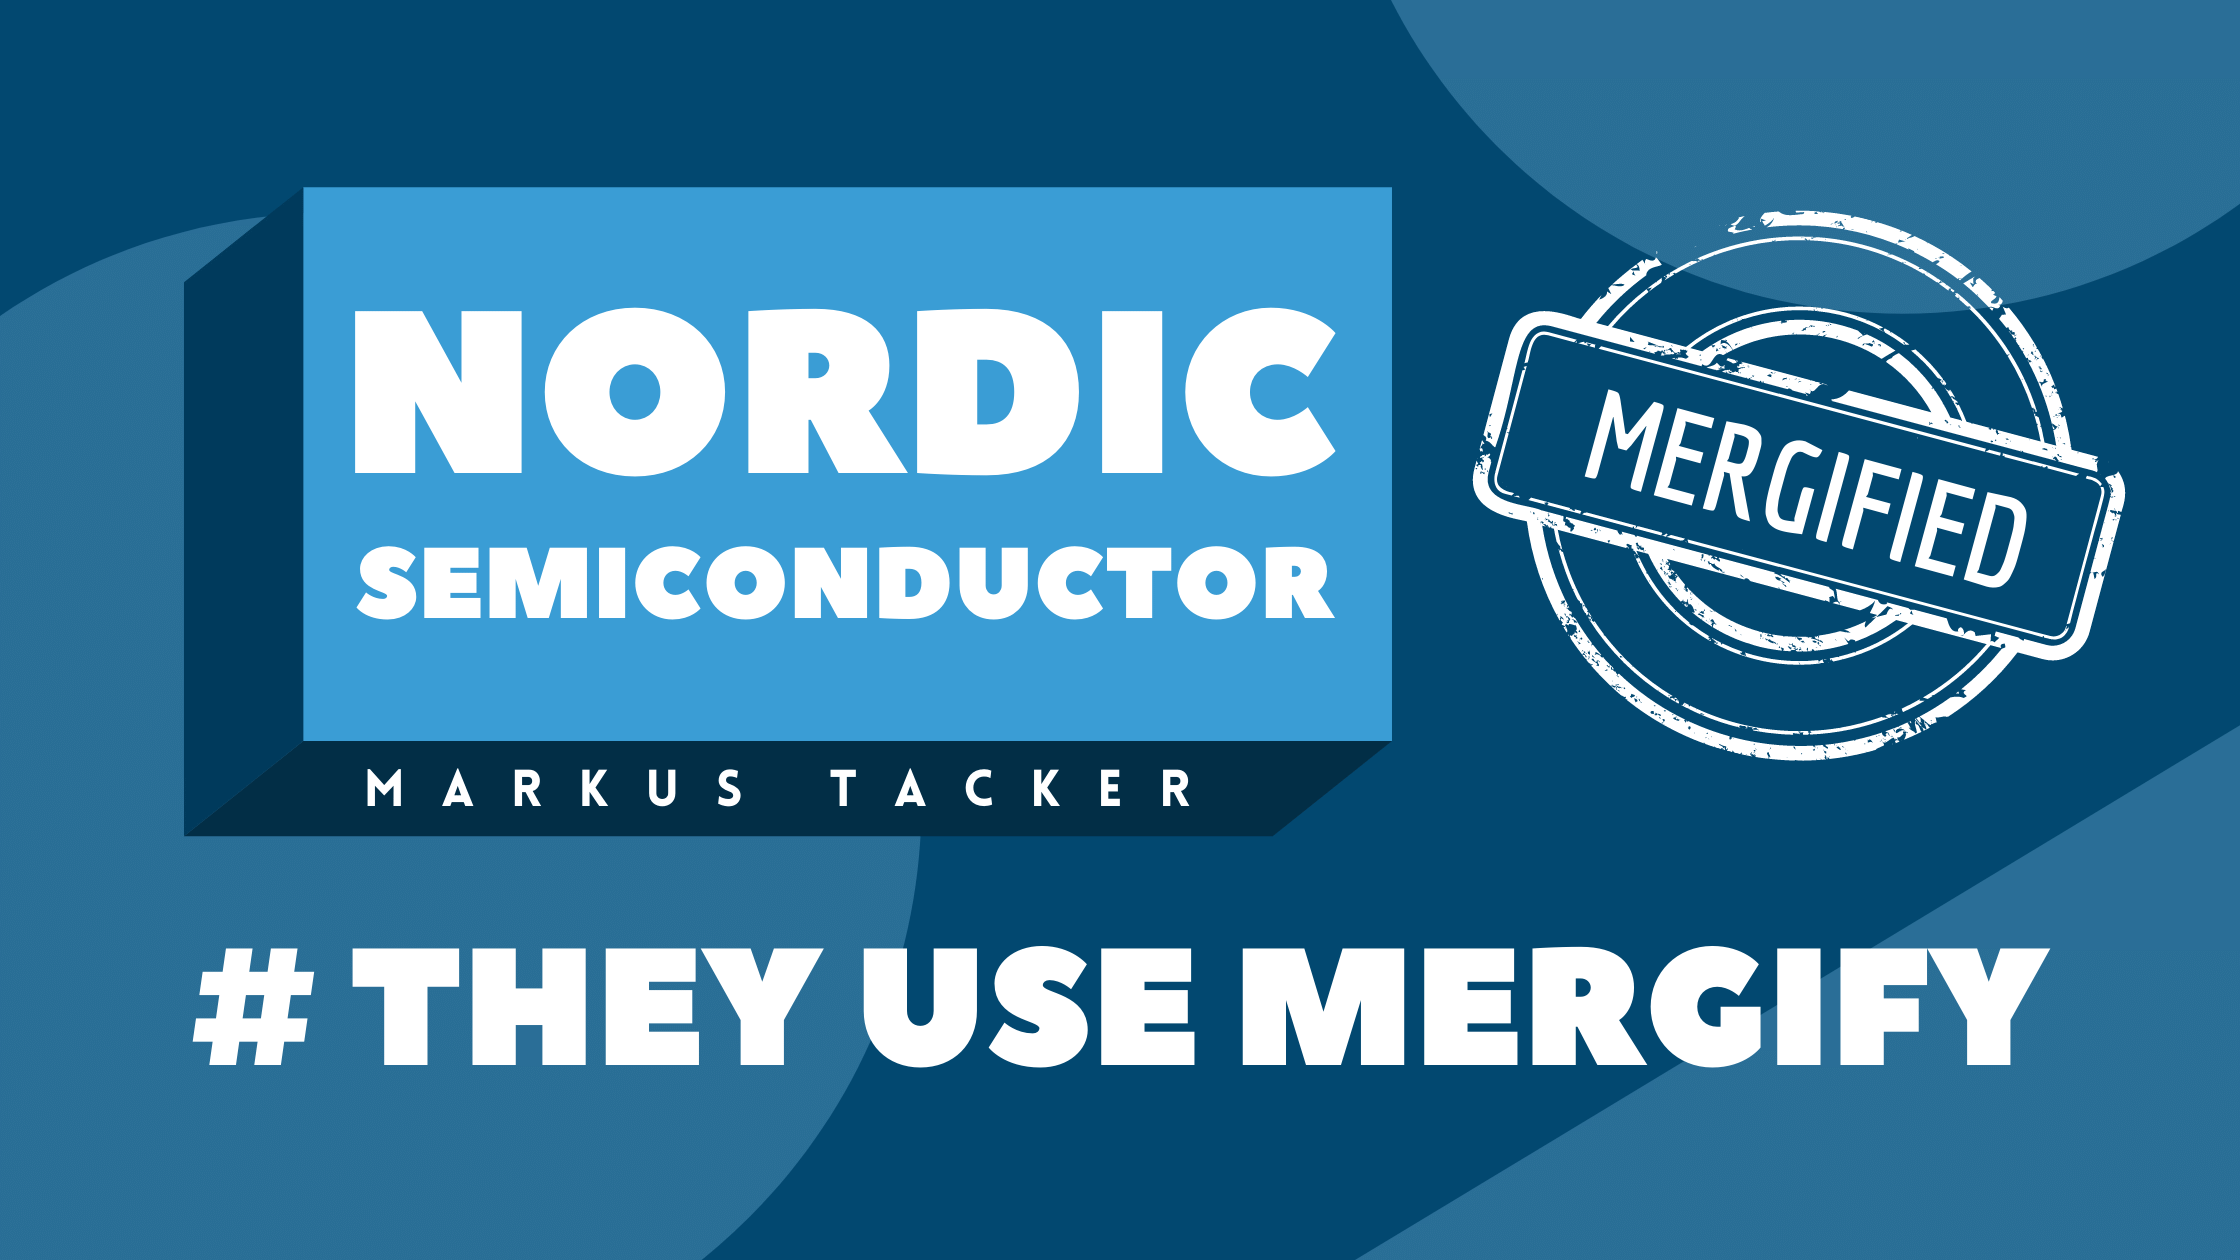 They use Mergify: Nordic Semiconductor